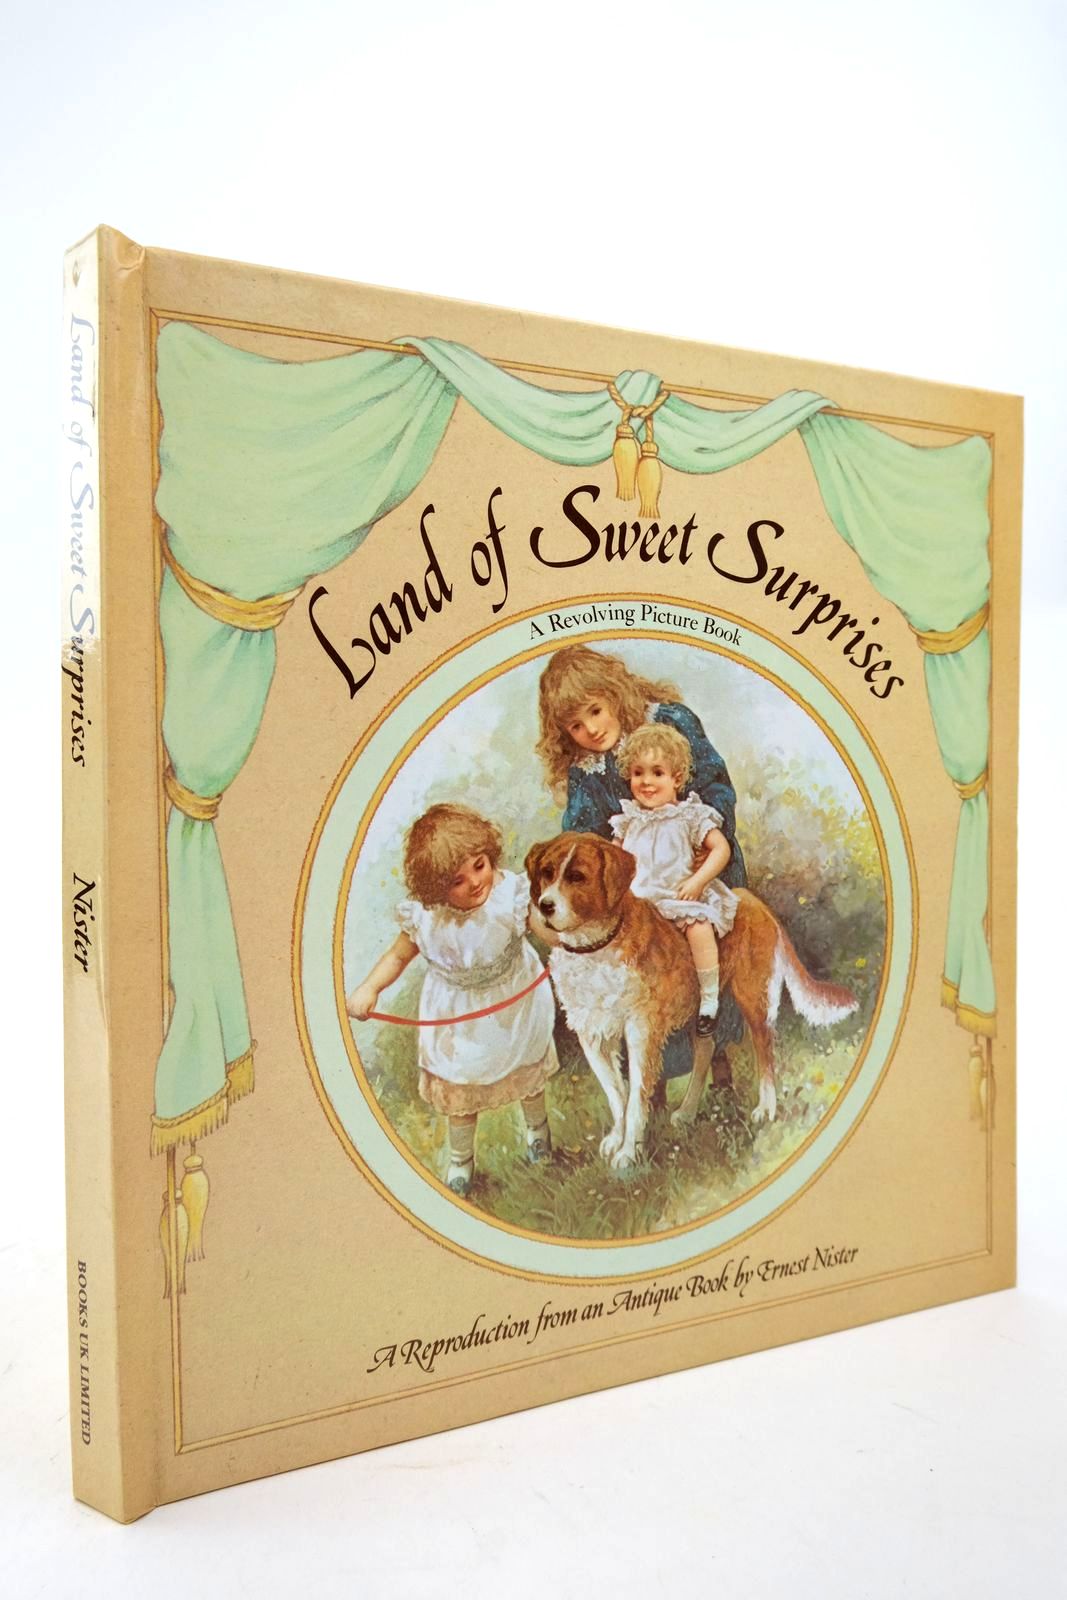 Photo of LAND OF SWEET SURPRISES published by Books UK Ltd. (STOCK CODE: 2140901)  for sale by Stella & Rose's Books